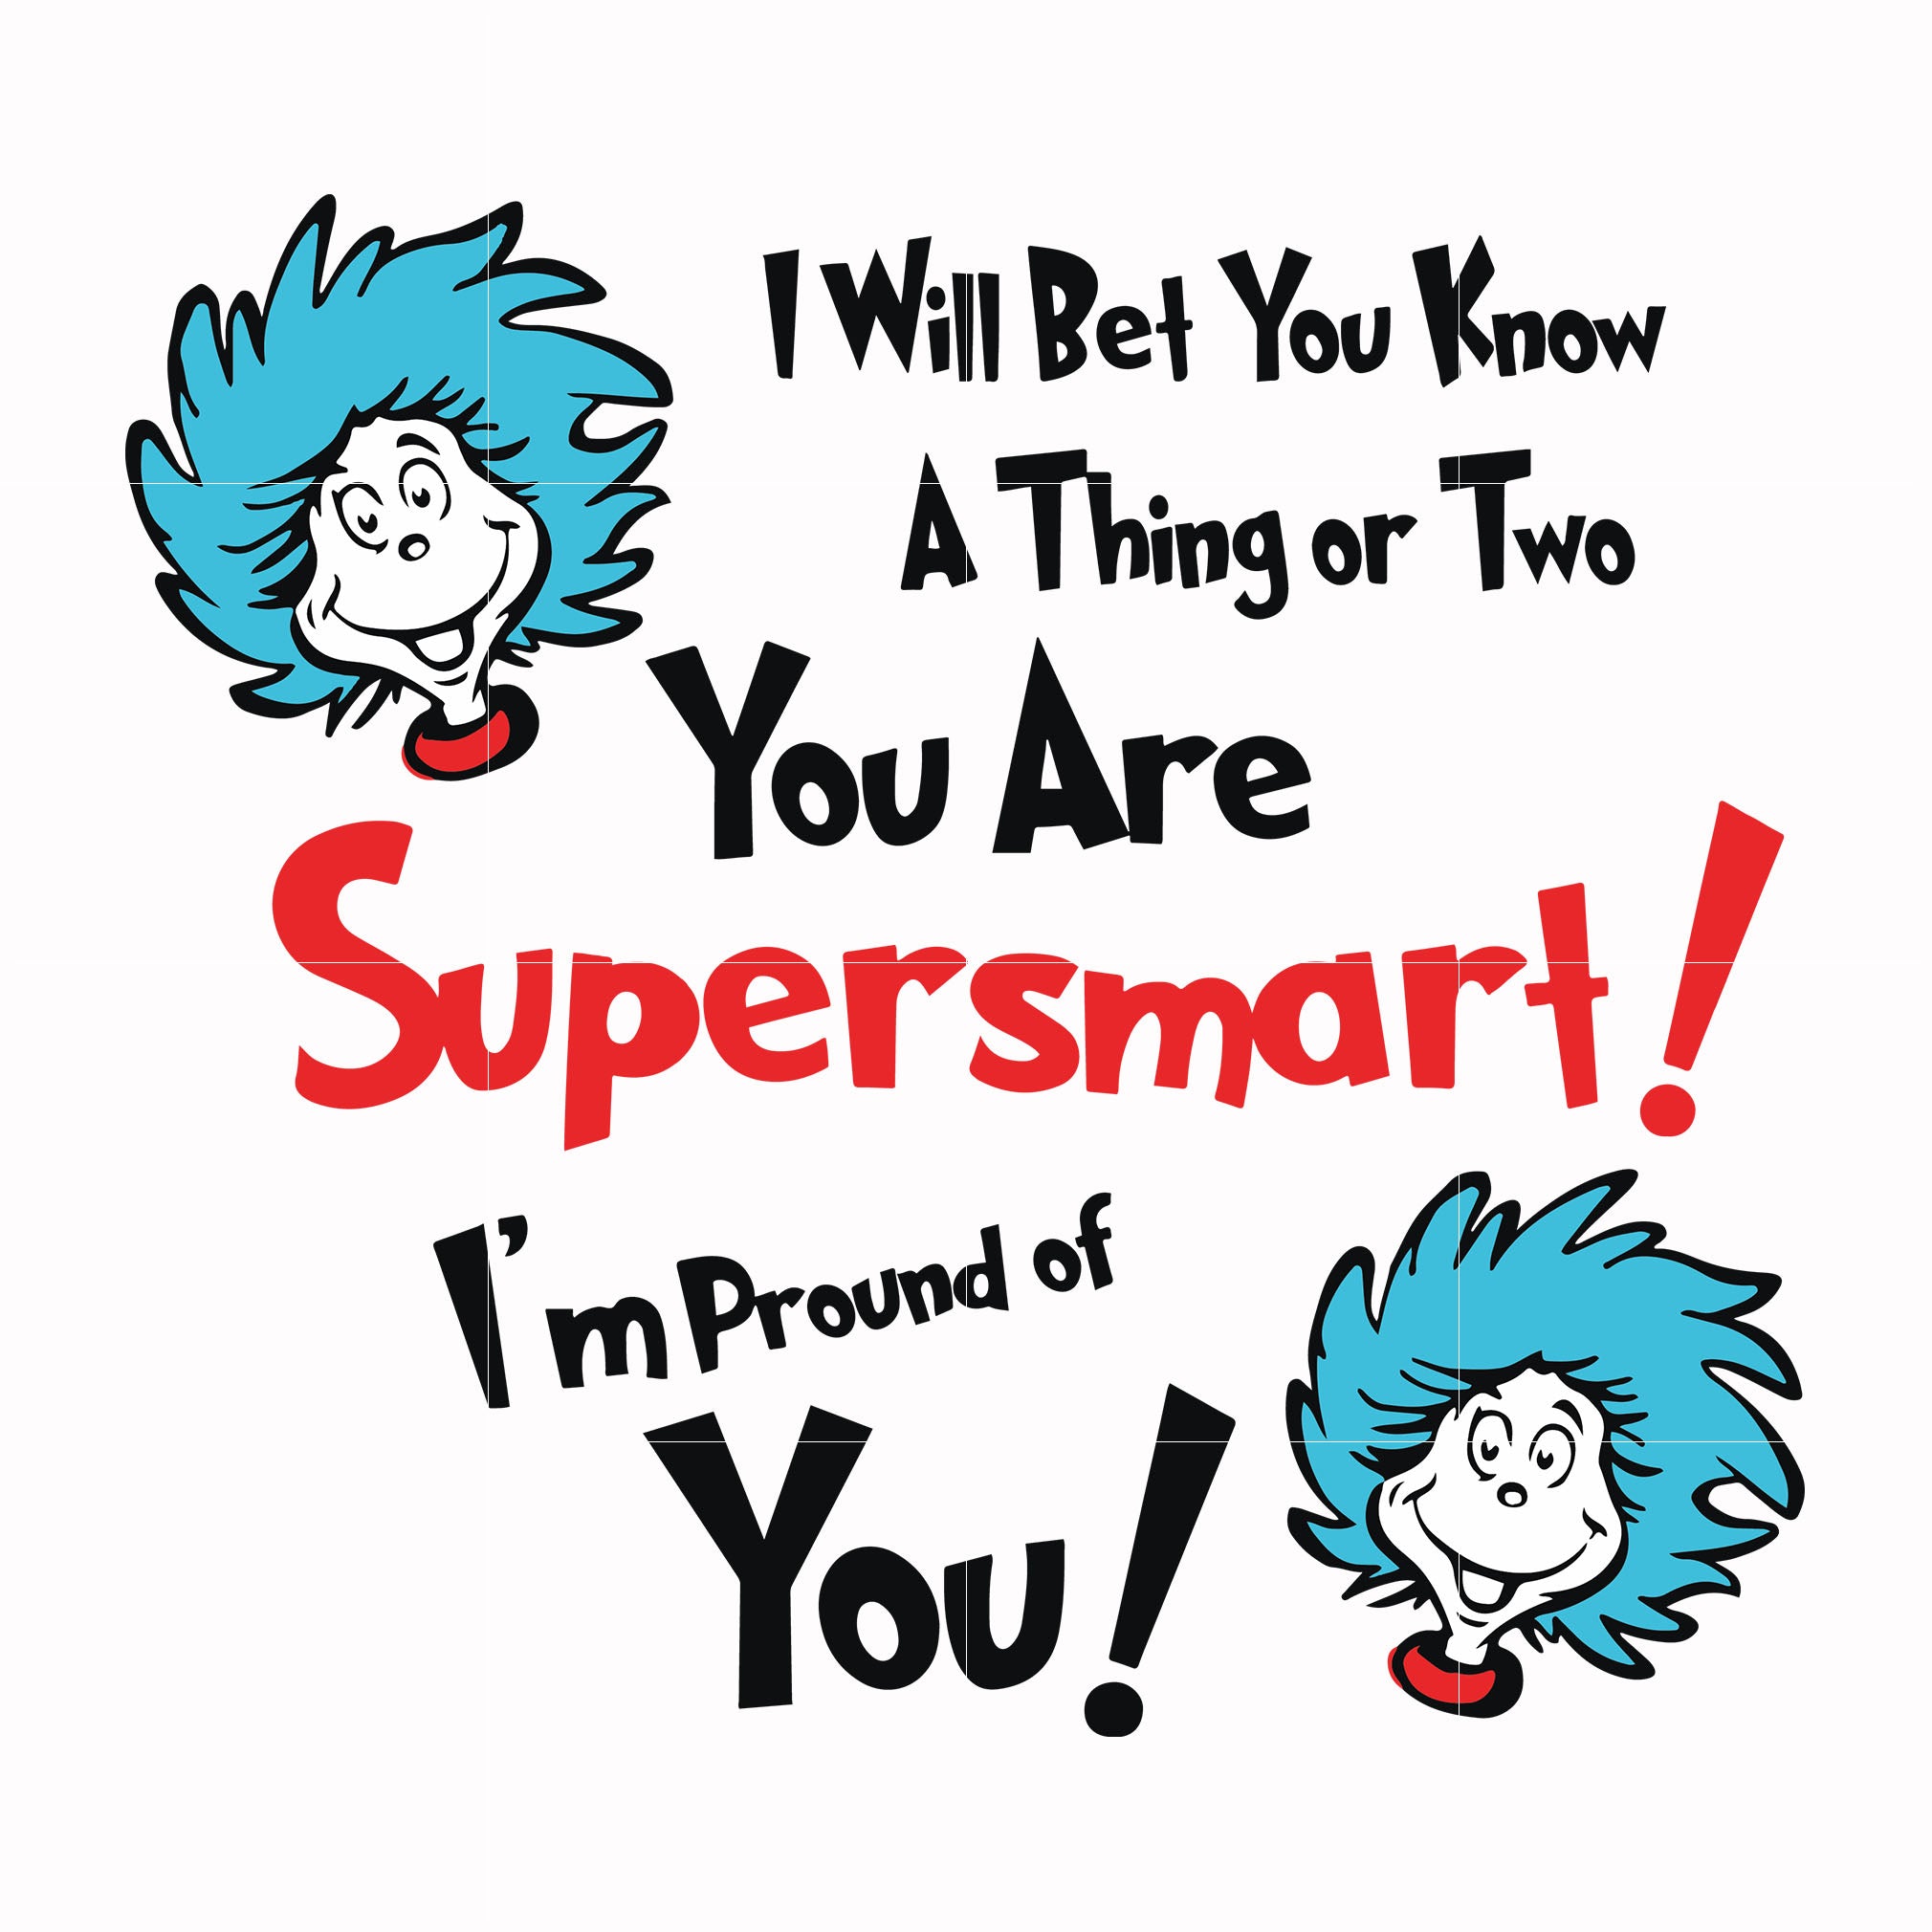 I will bet you know a thing or two you are supersmart I'm proud of you svg, png, dxf, eps file